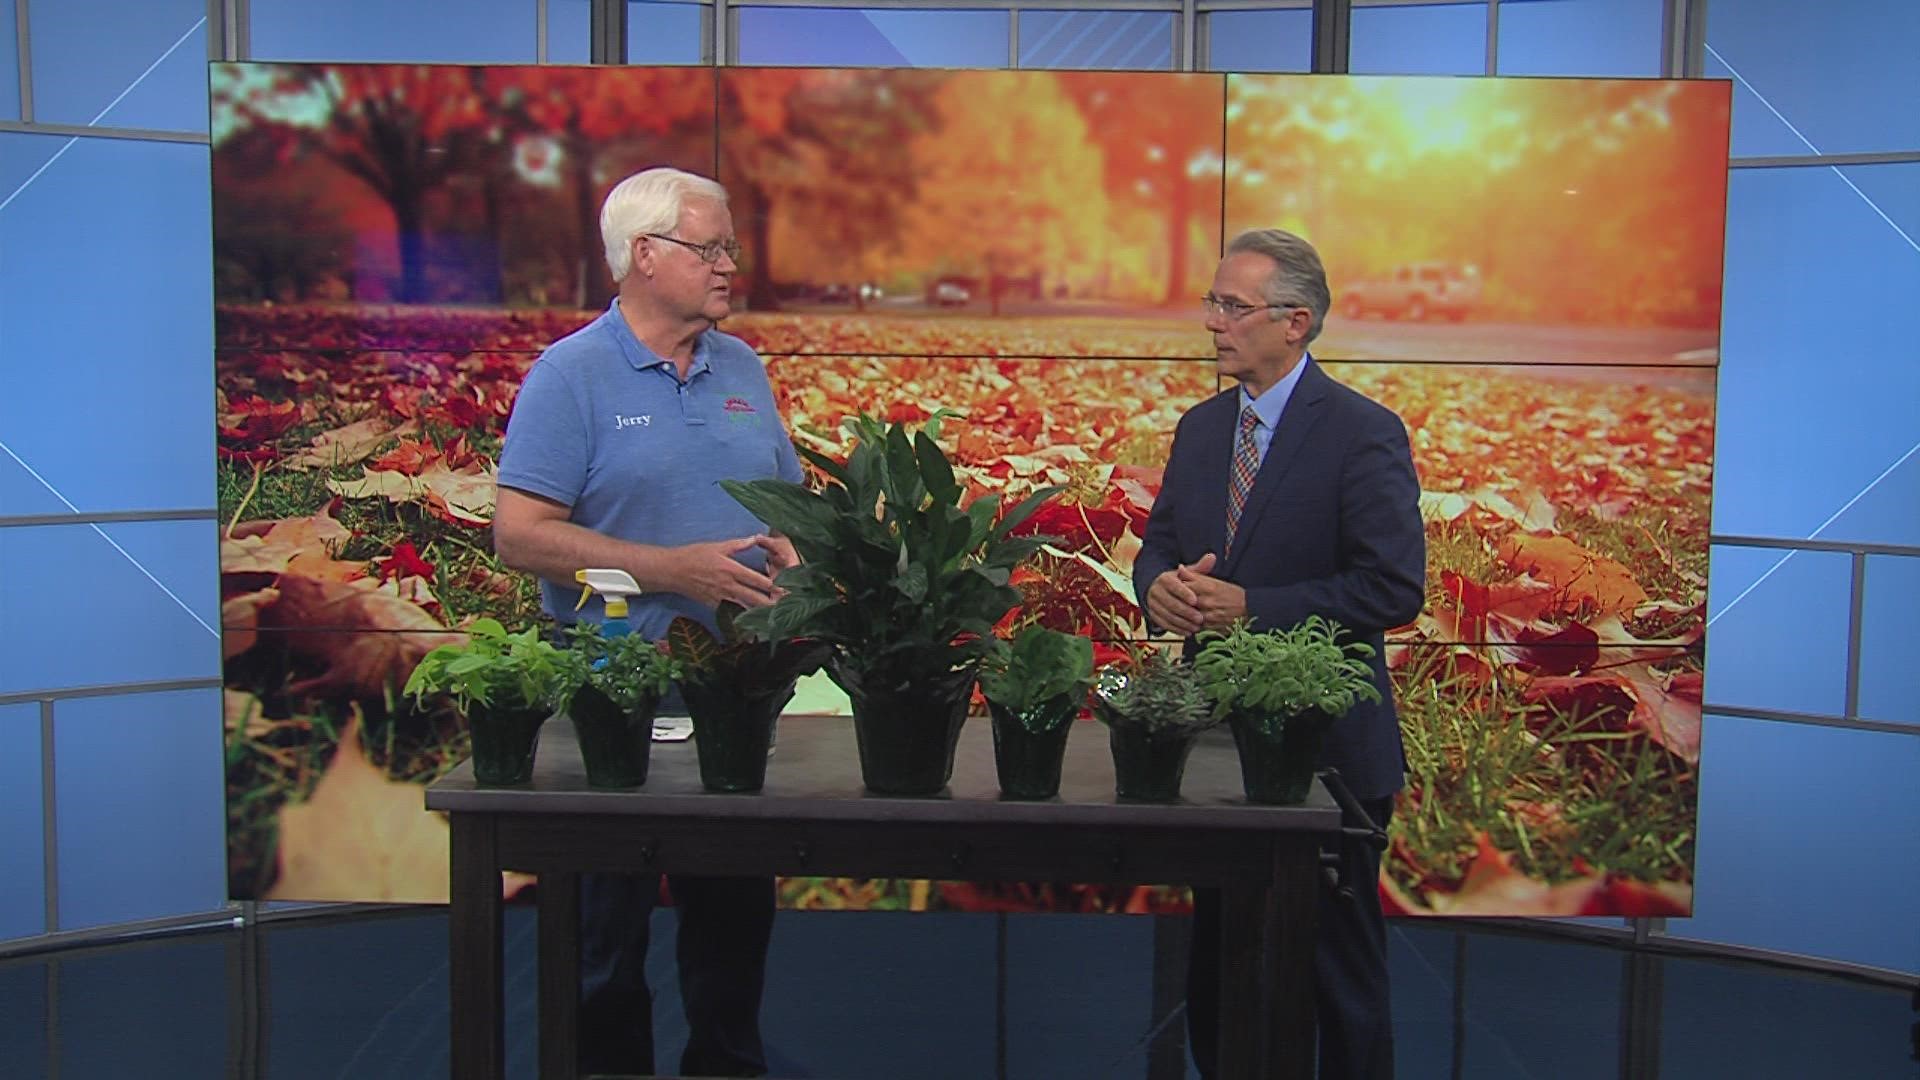 From pesky bugs to proper sunlight, Jerry Holub has advice for it all.